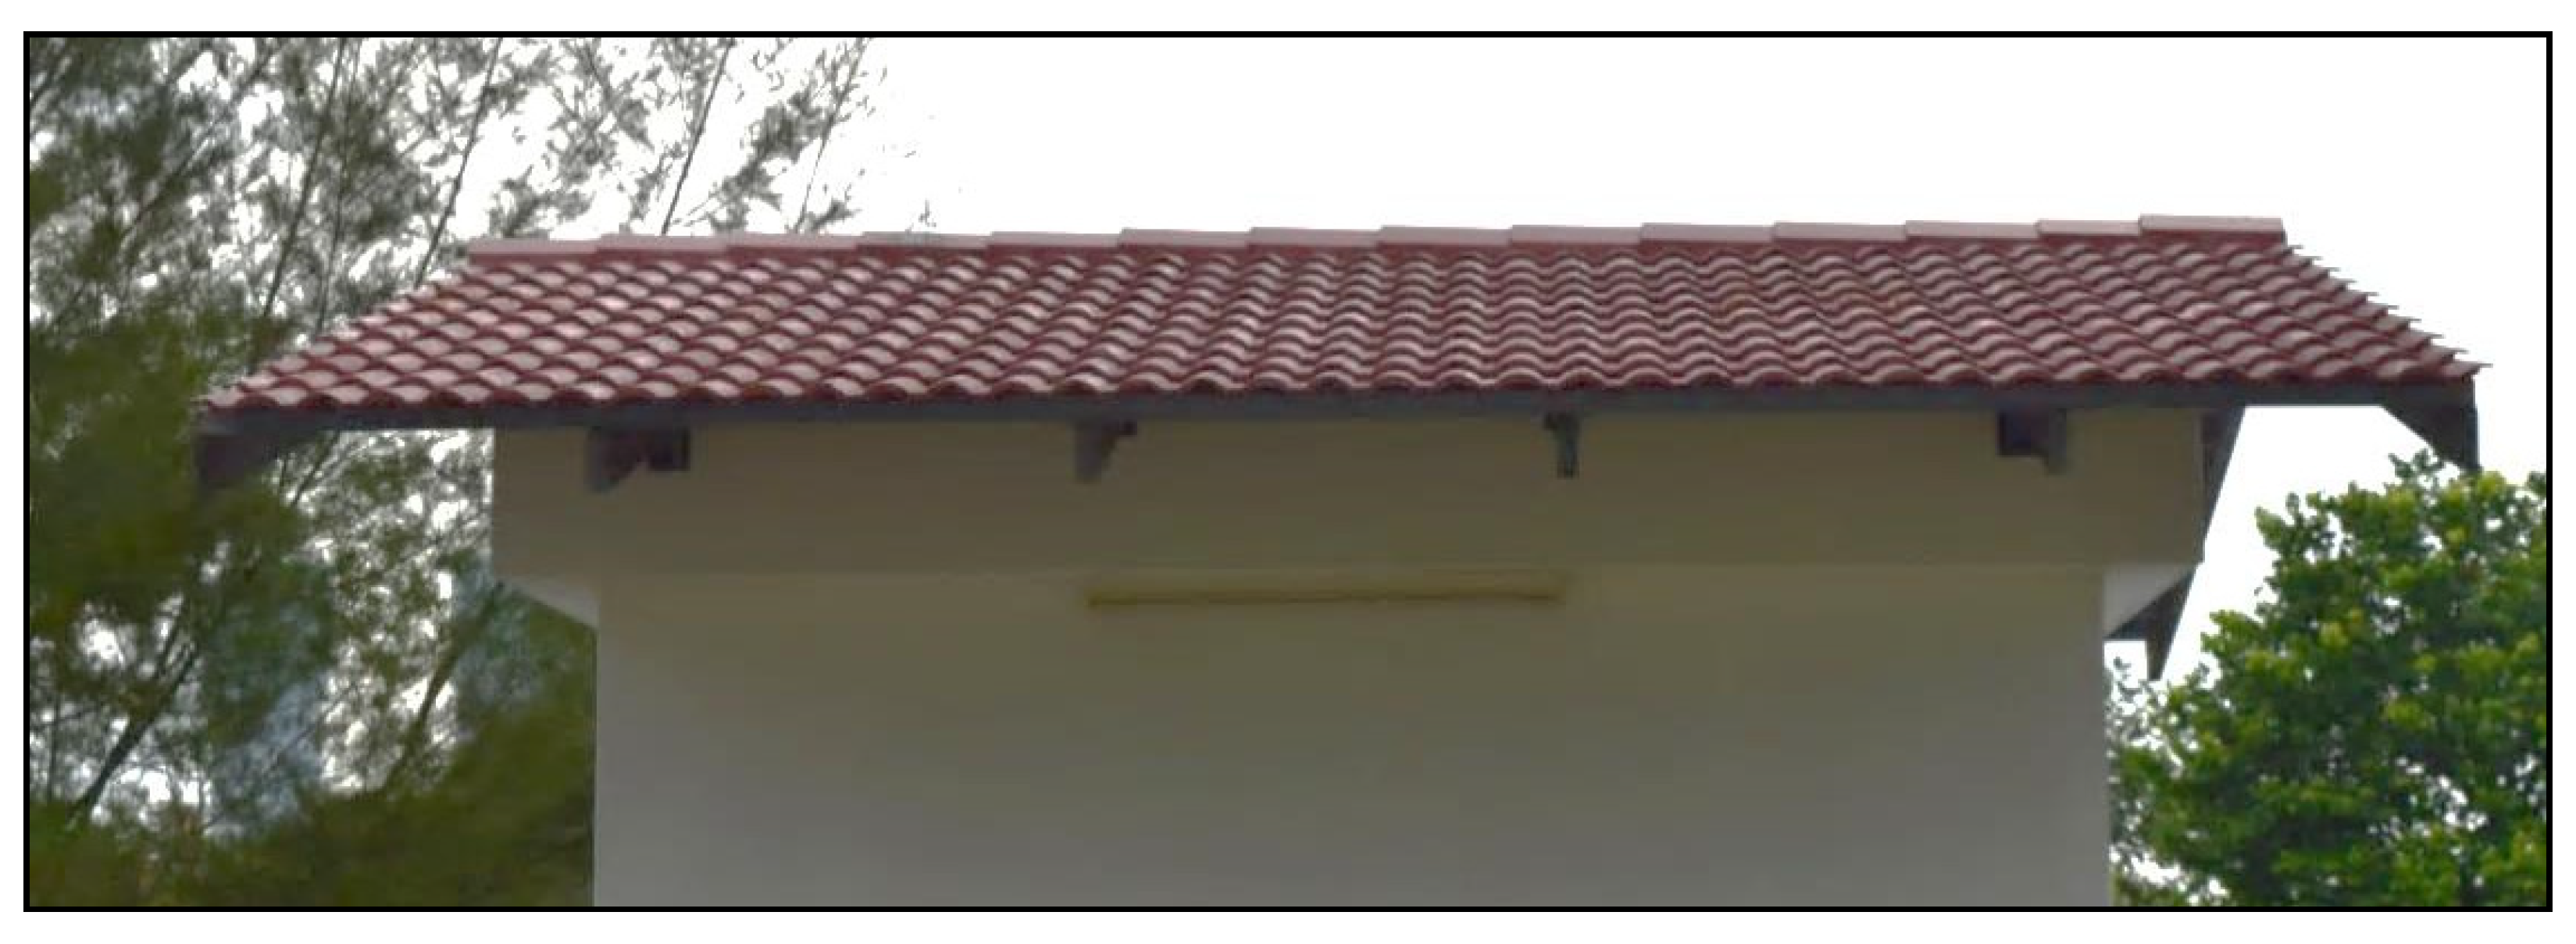 BROWNISH TO GOLDISH SMOOTH FACE STYLE SMOOTH BOTTOM ROOFING CEMENT FLAT TILE 